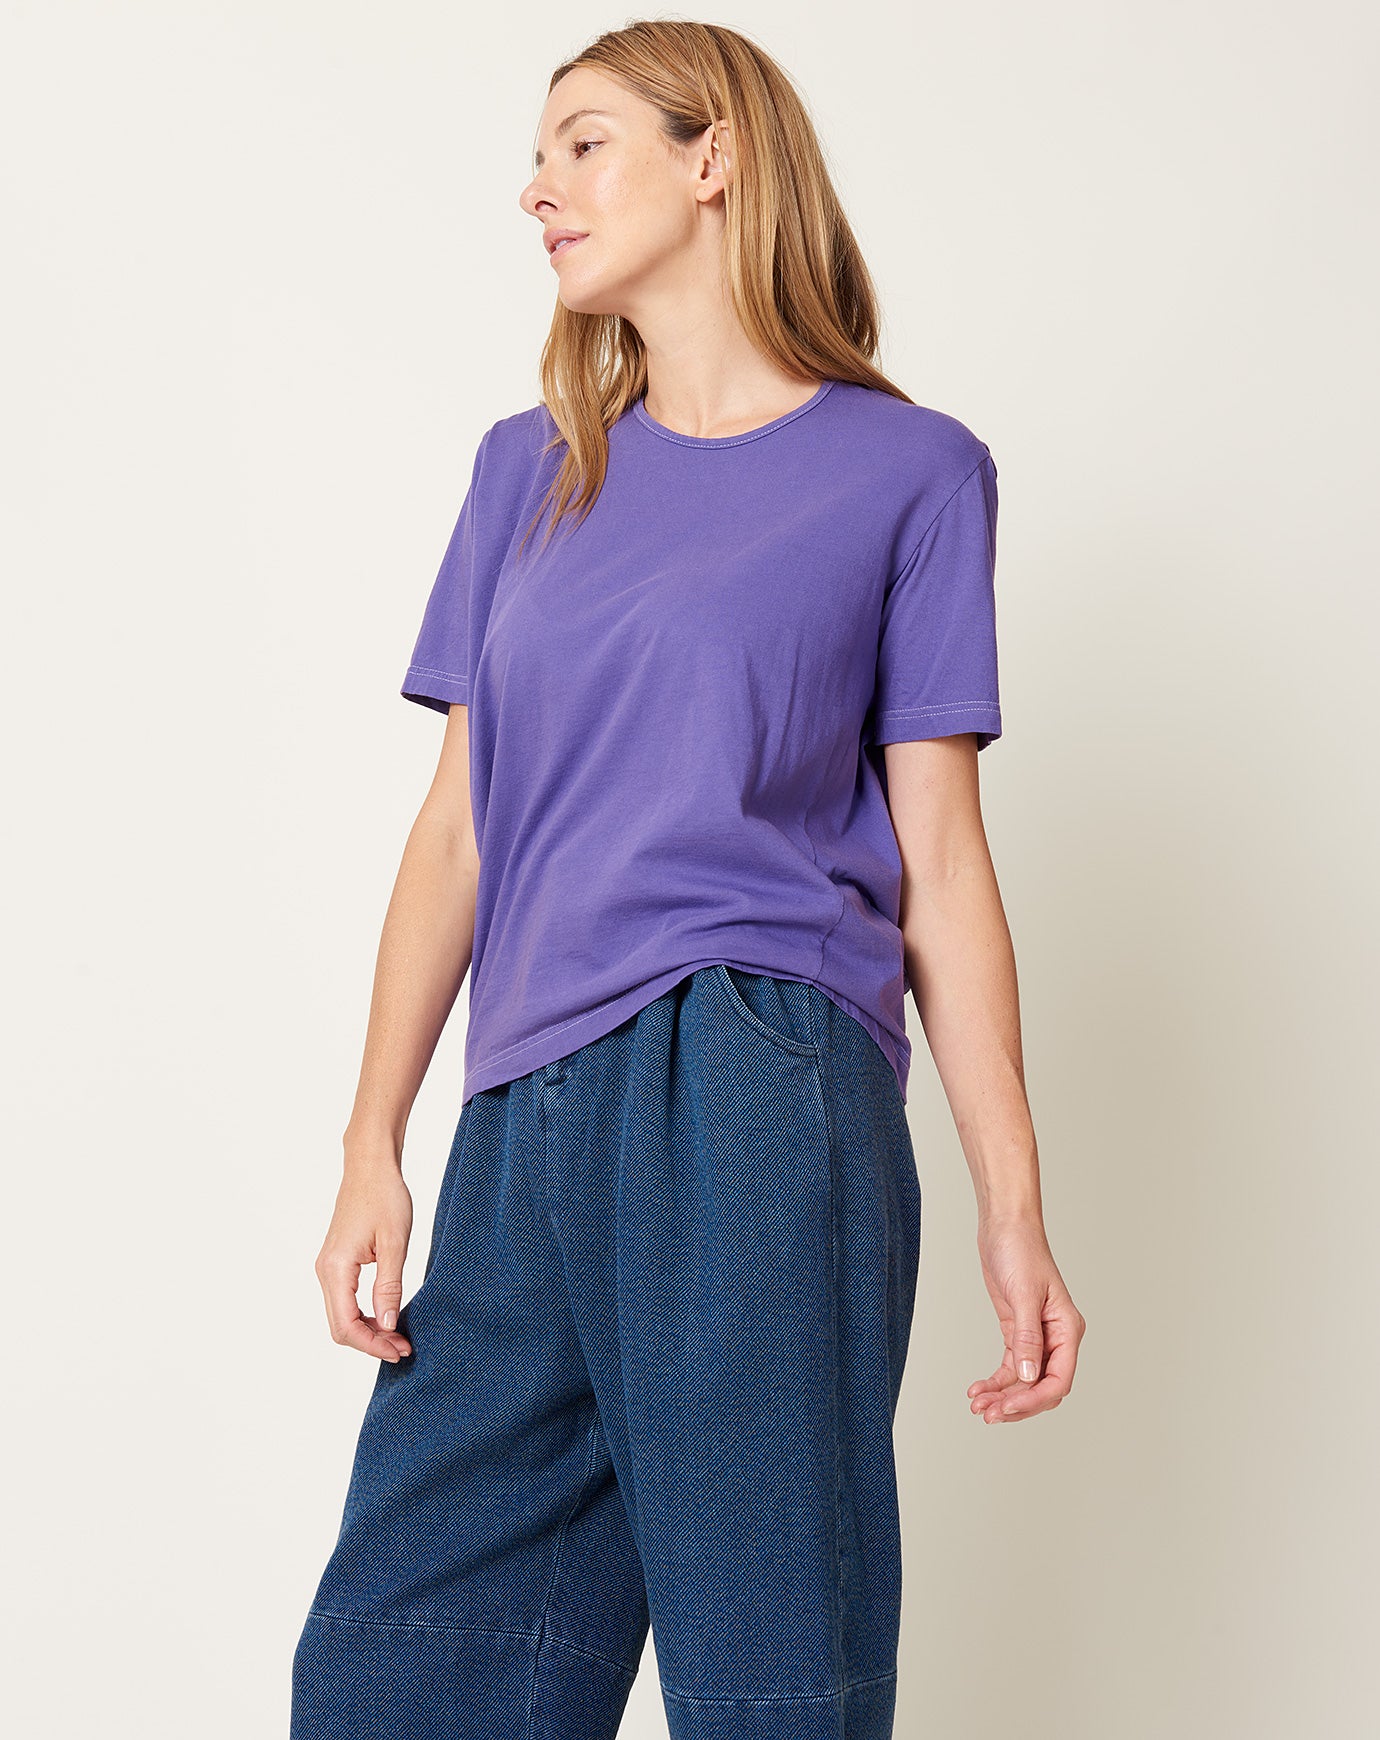 Anntian Edgy T Shirt in Garment Dyed Purple